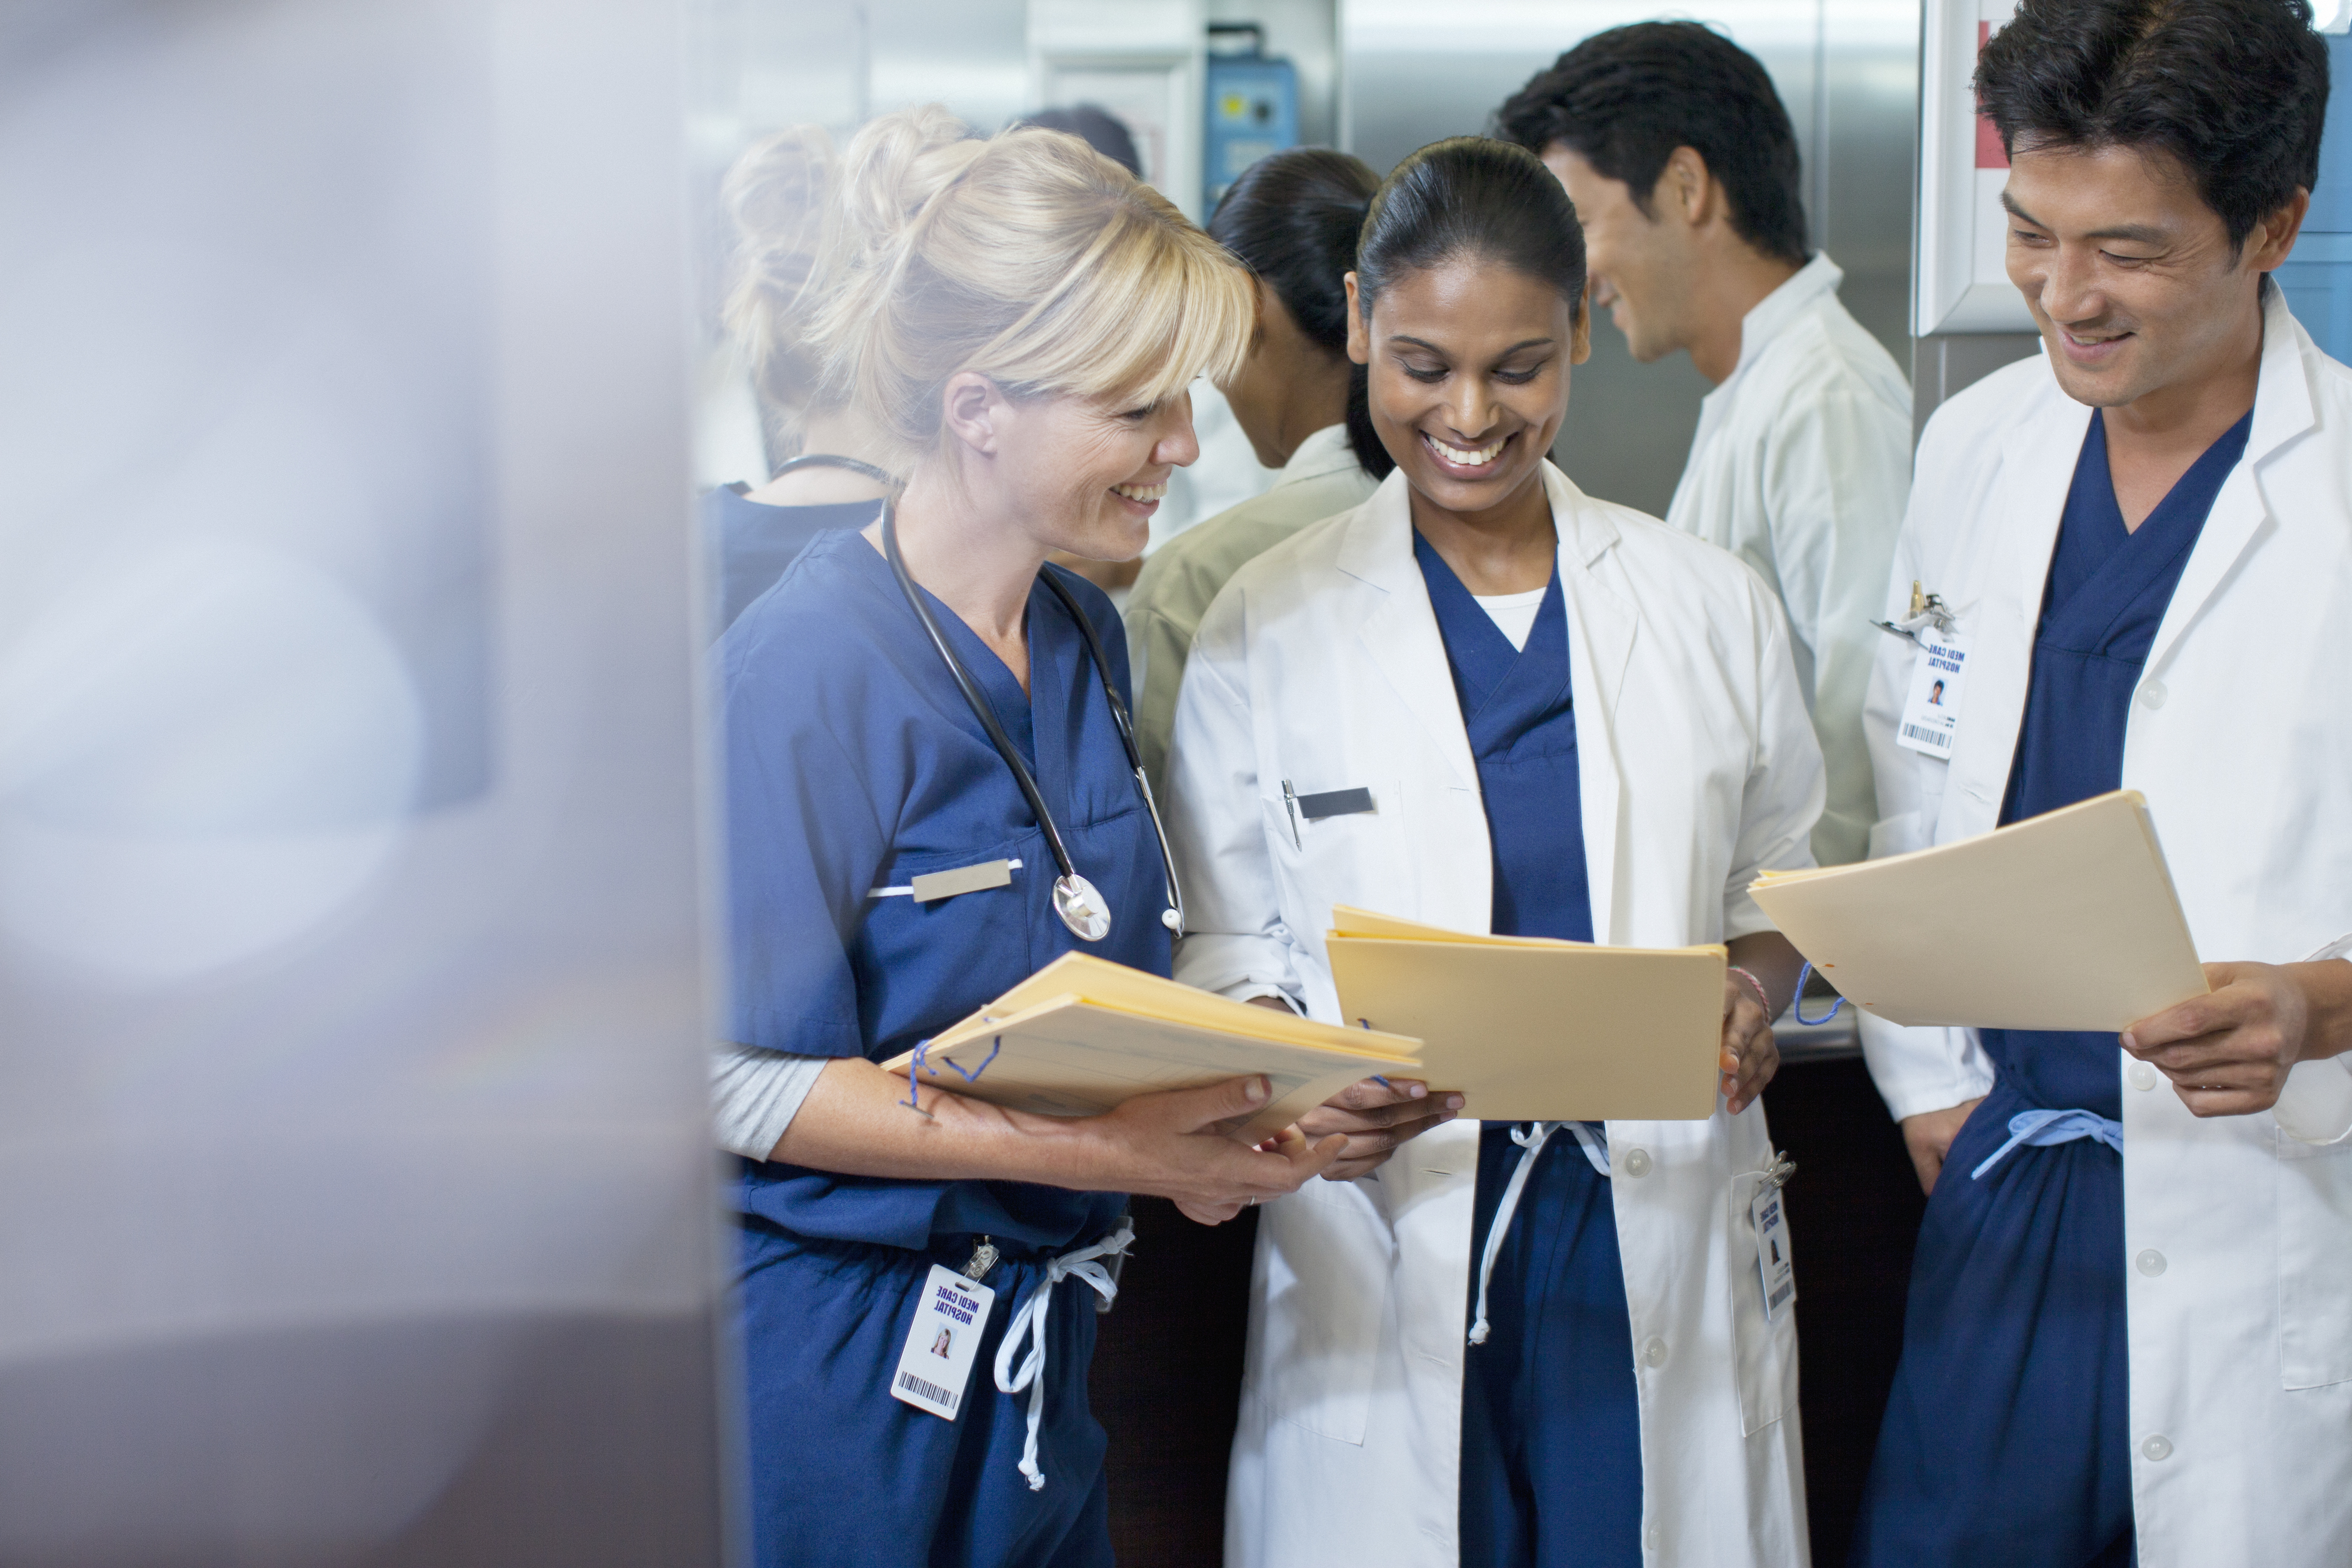 Medical professionals with file folders in hand gathering for discussion